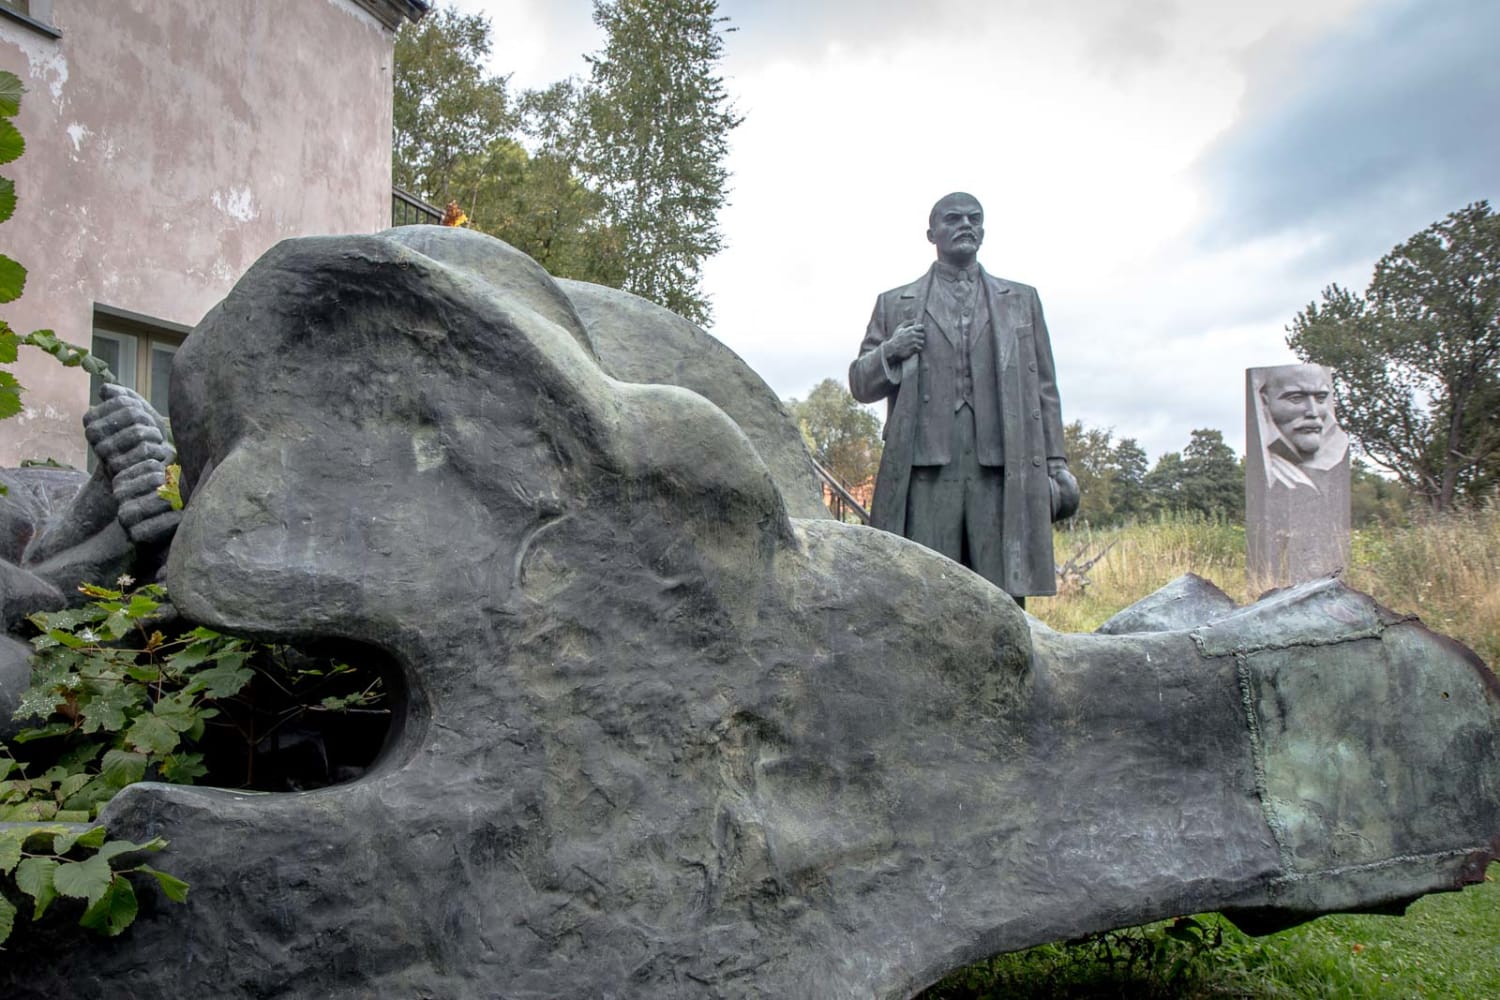 The graveyard of Soviet statues